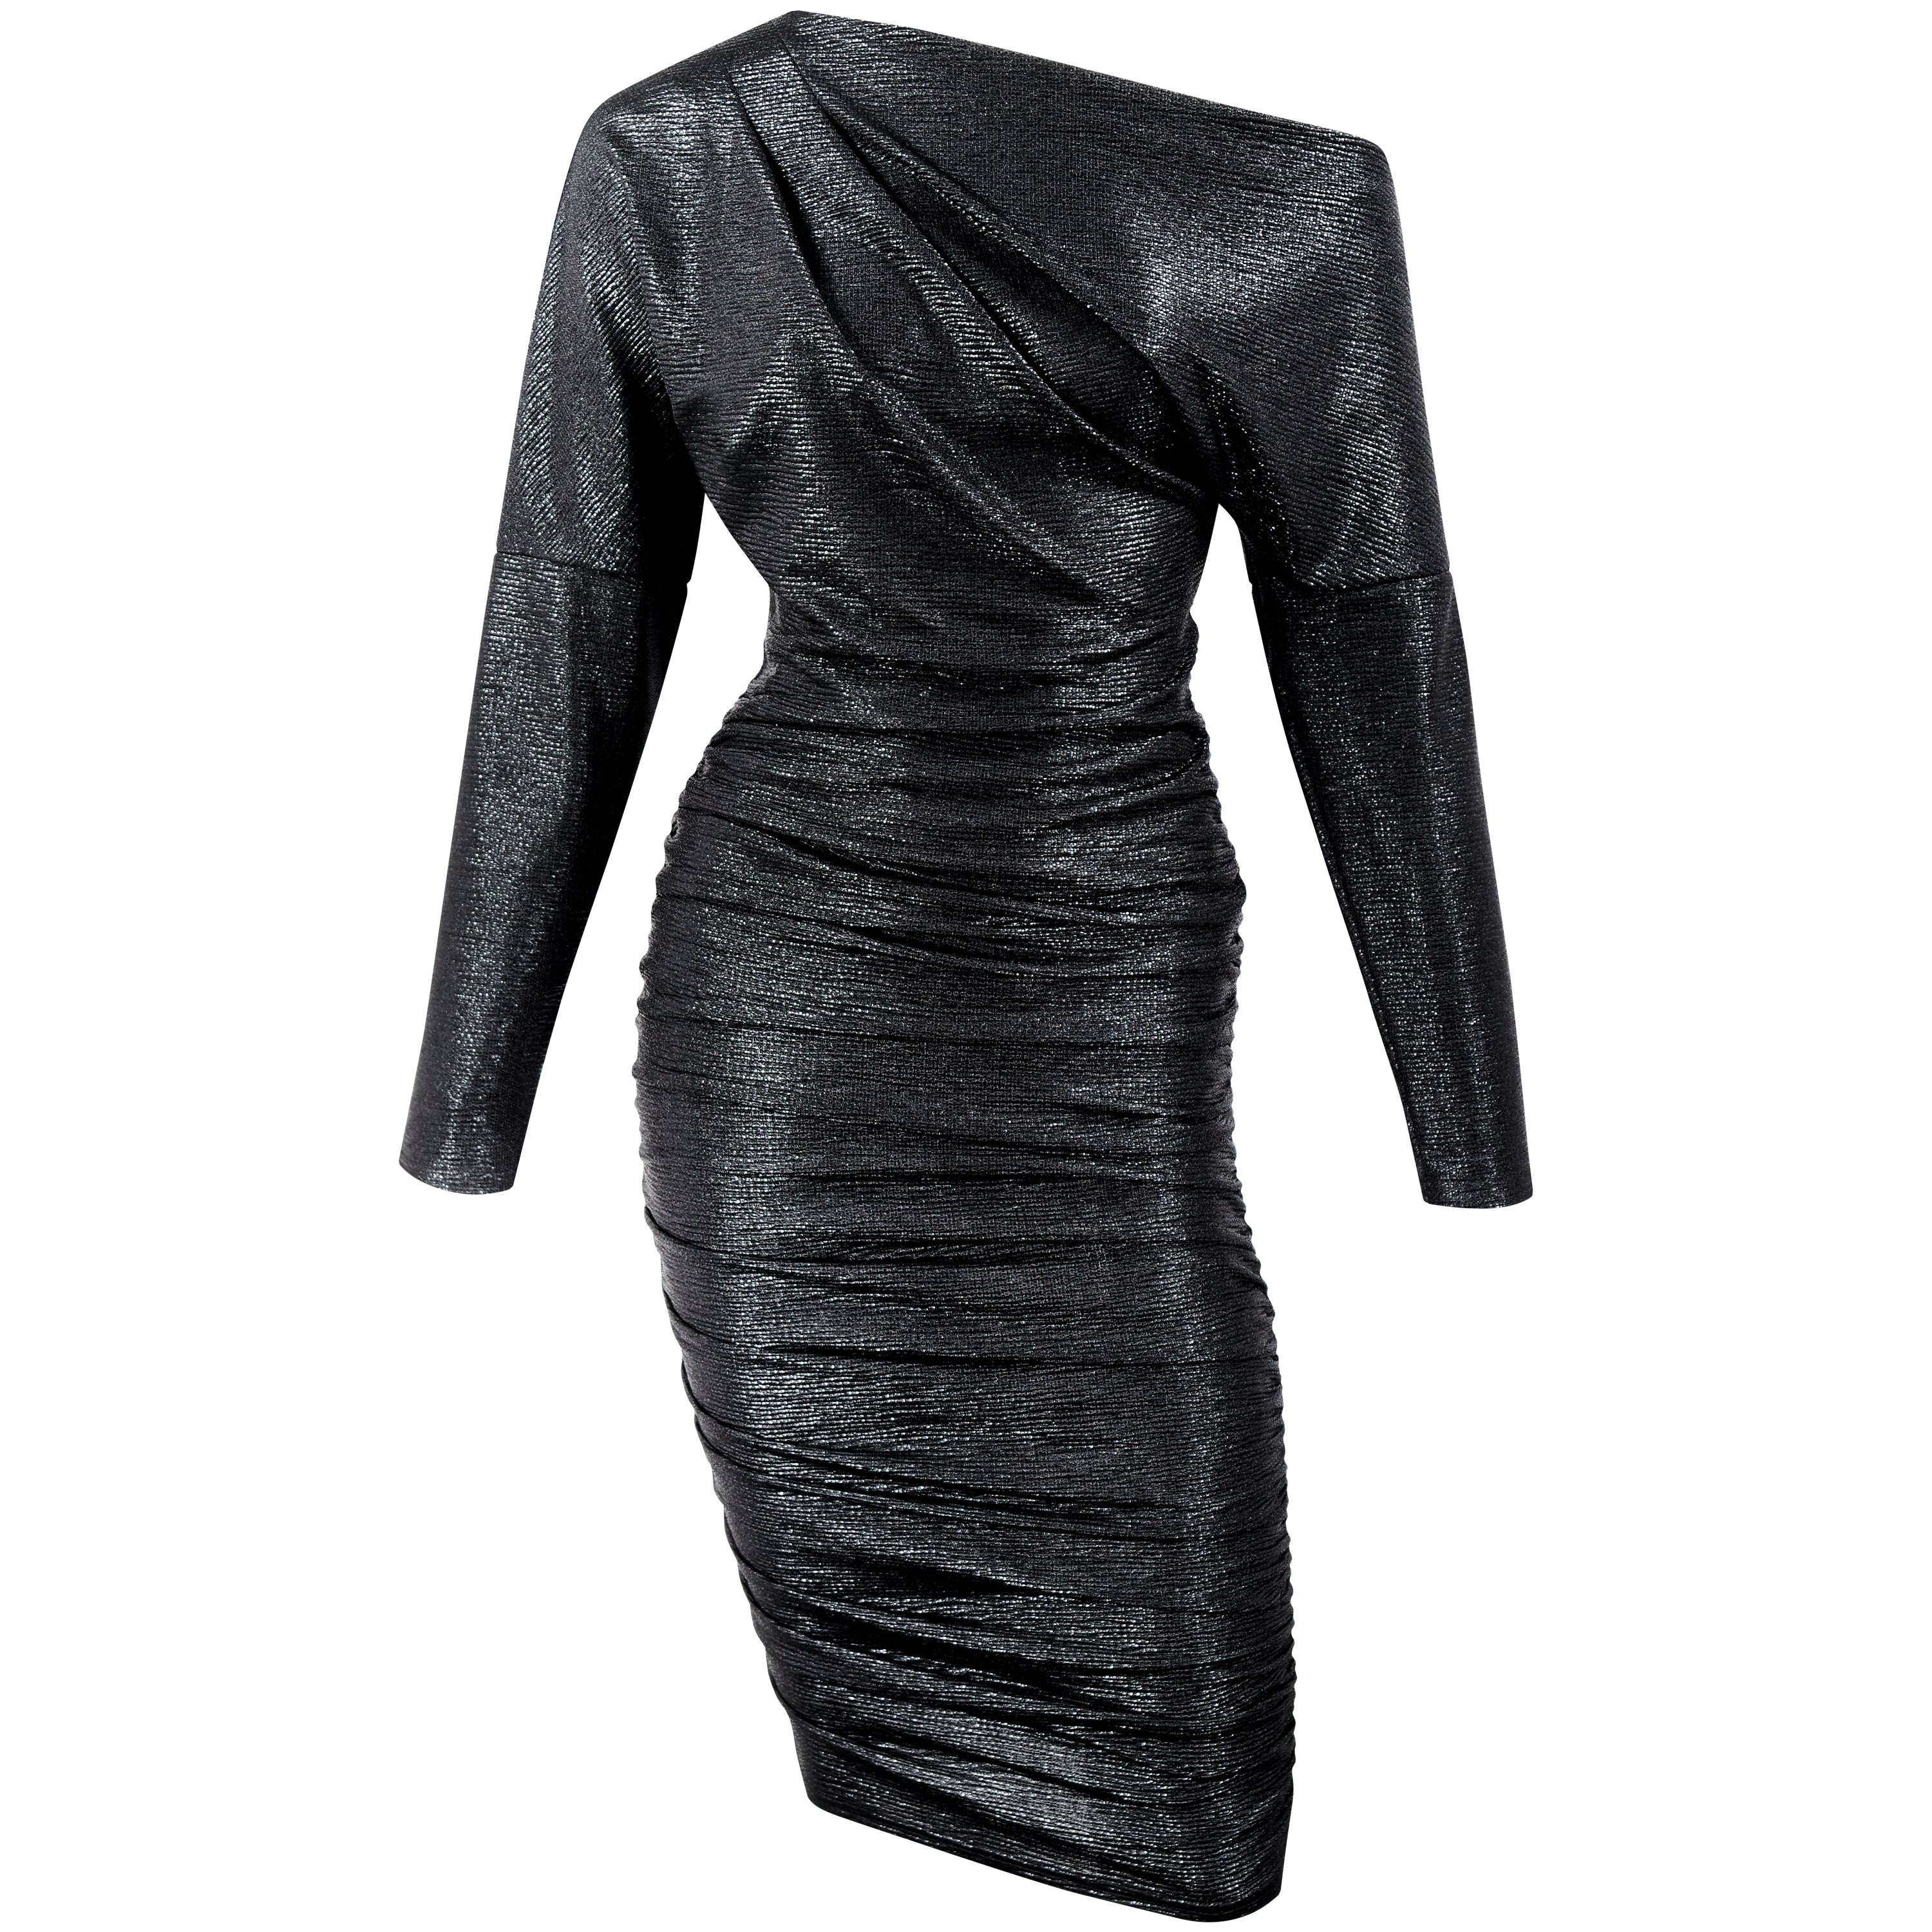 I Told You So Black Metallic Drop Shoulder Dress By Me & Thee 